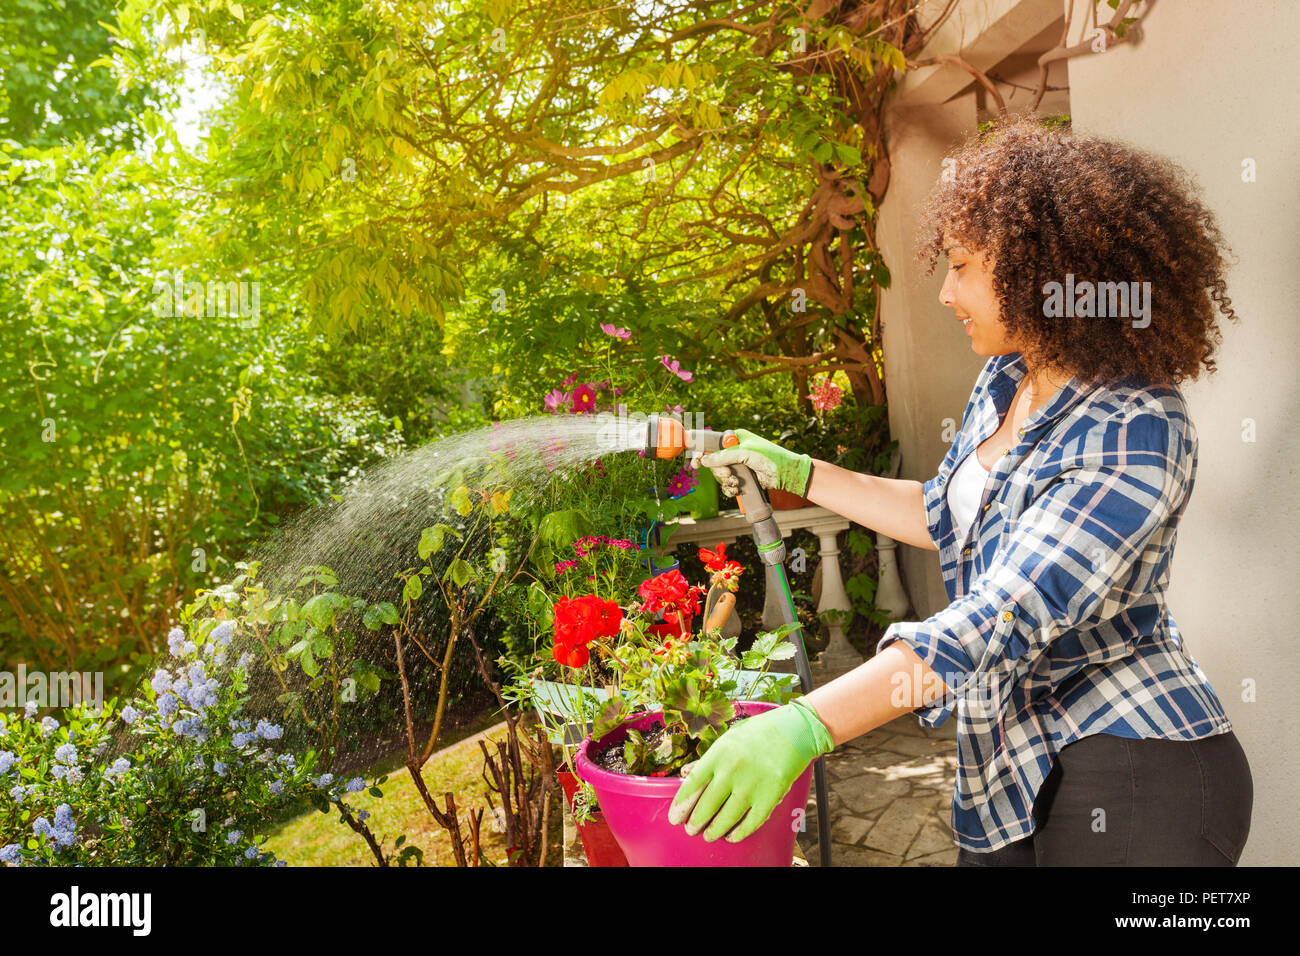 Side view portrait of teenage African girl watering plants using garden hose and hand sprinkler Stock Photo